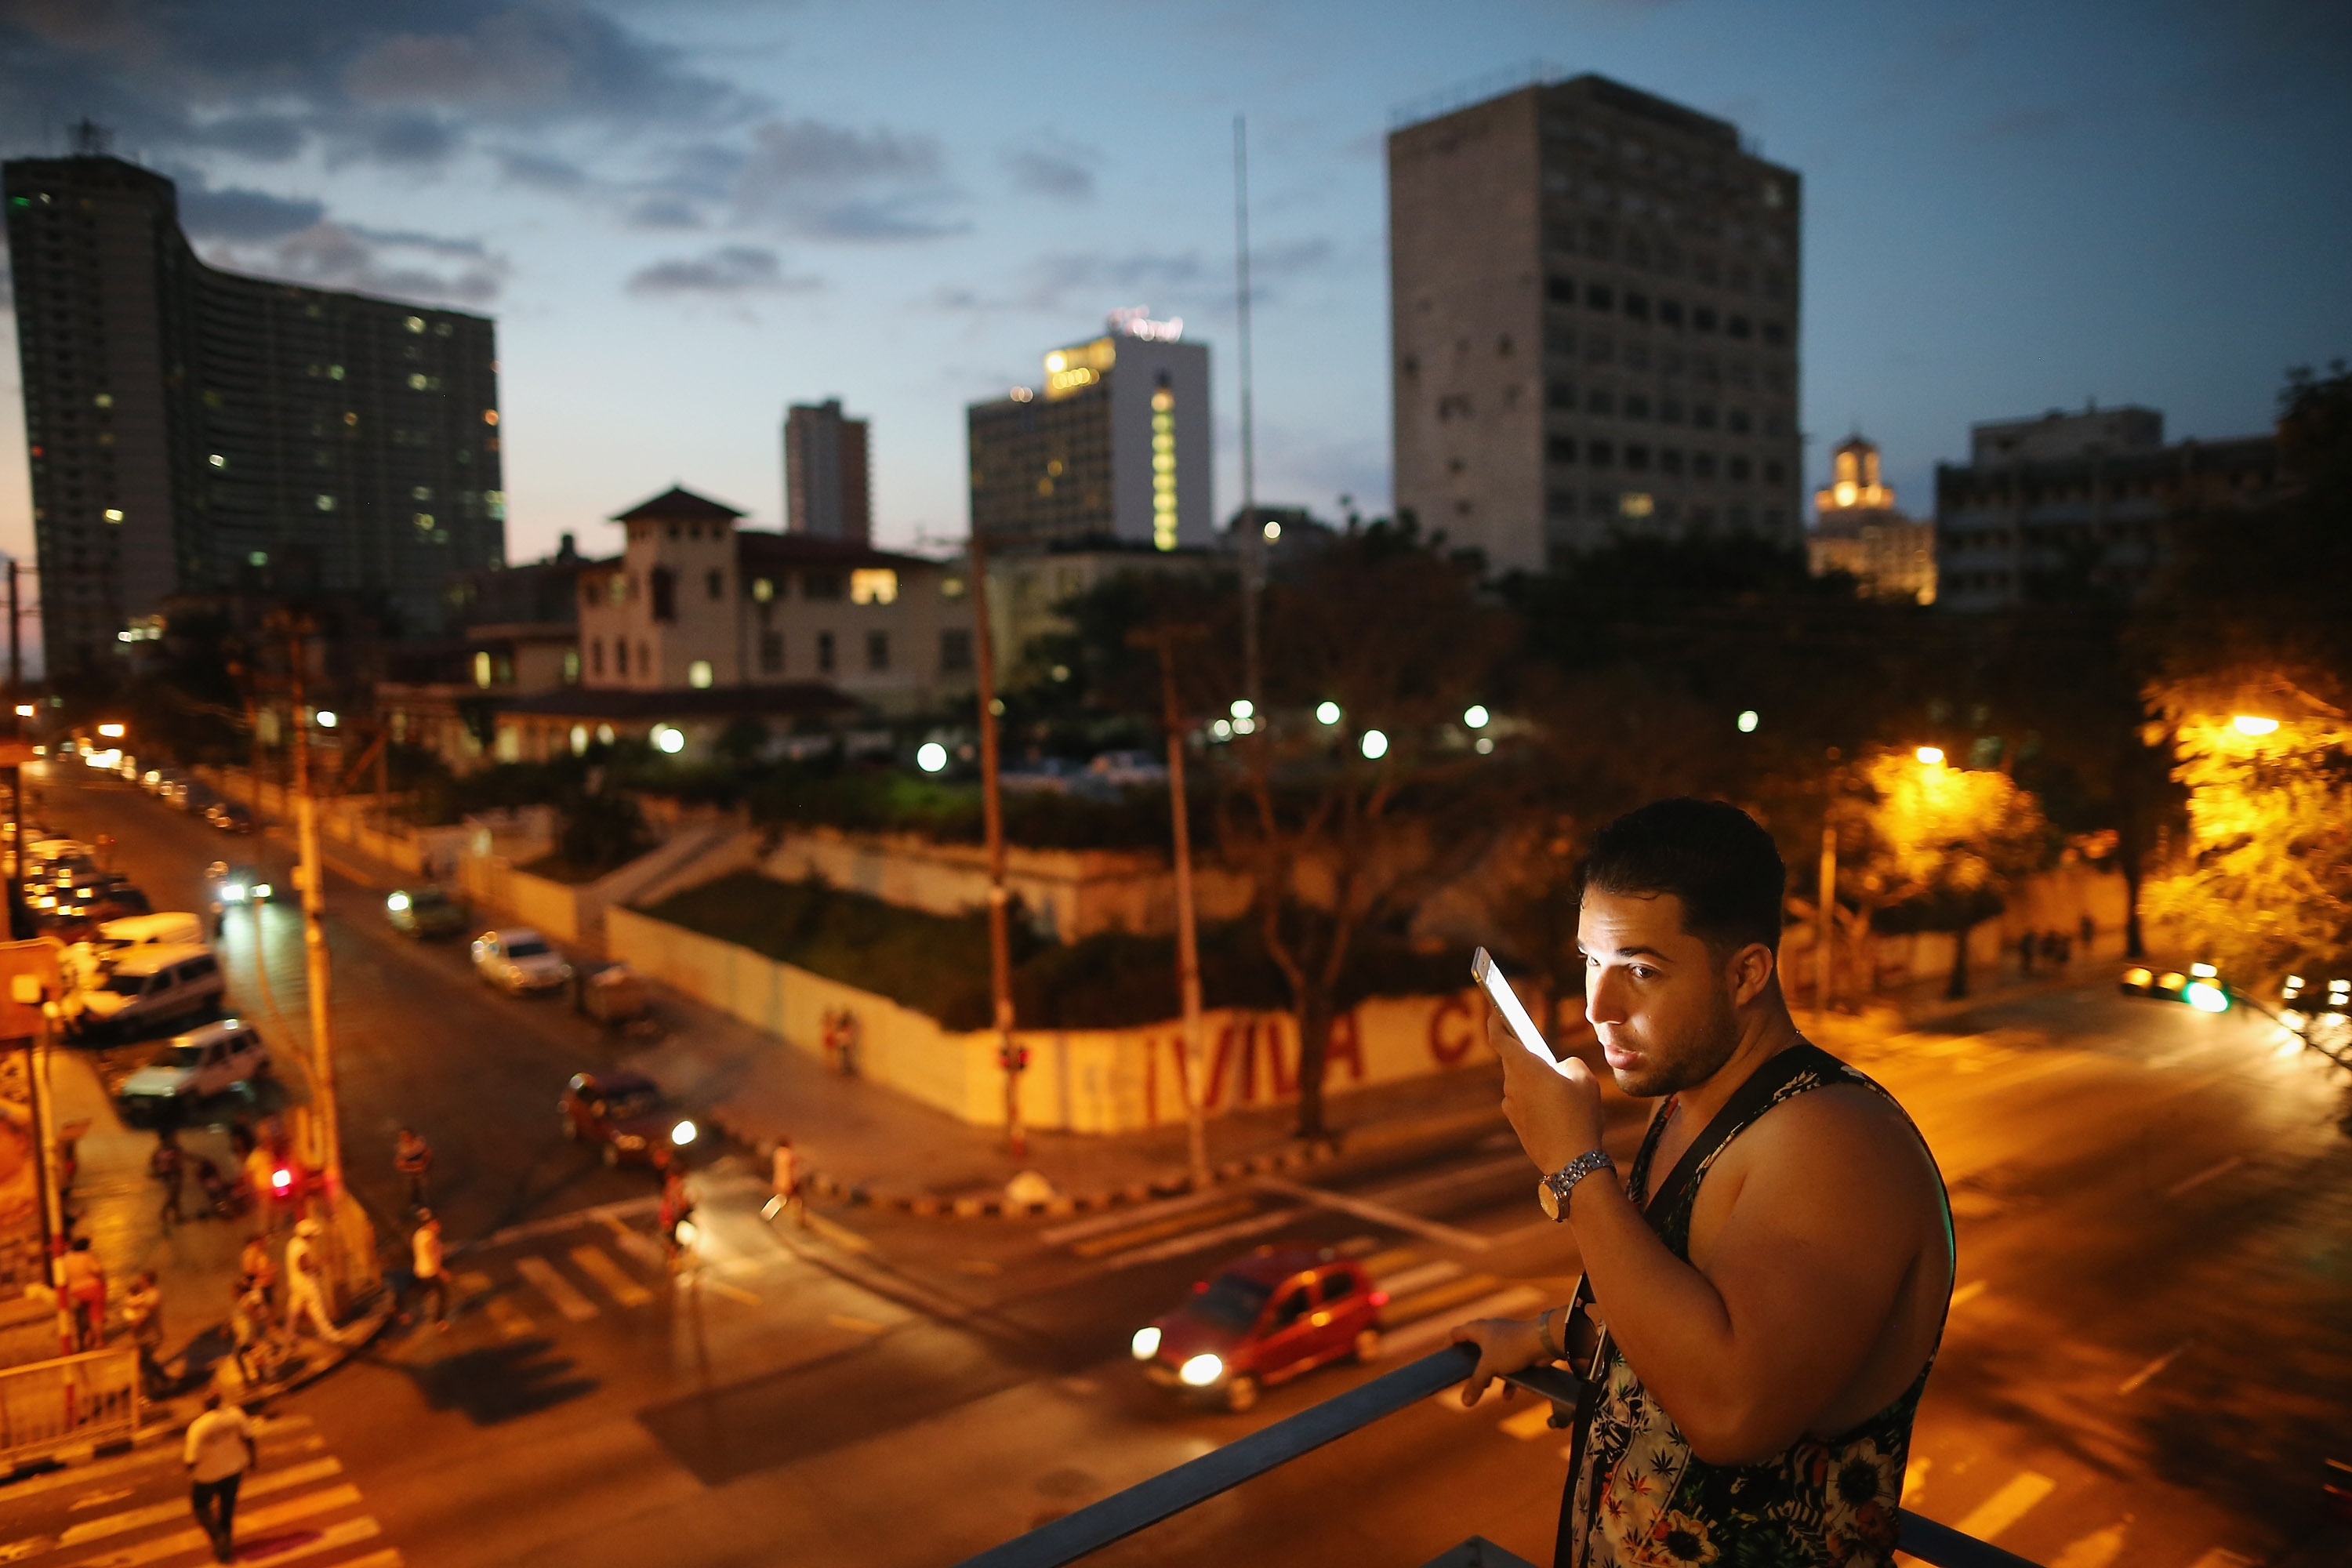 Cuba Poised For Change As Diplomatic Relations Reestablished With U.S.